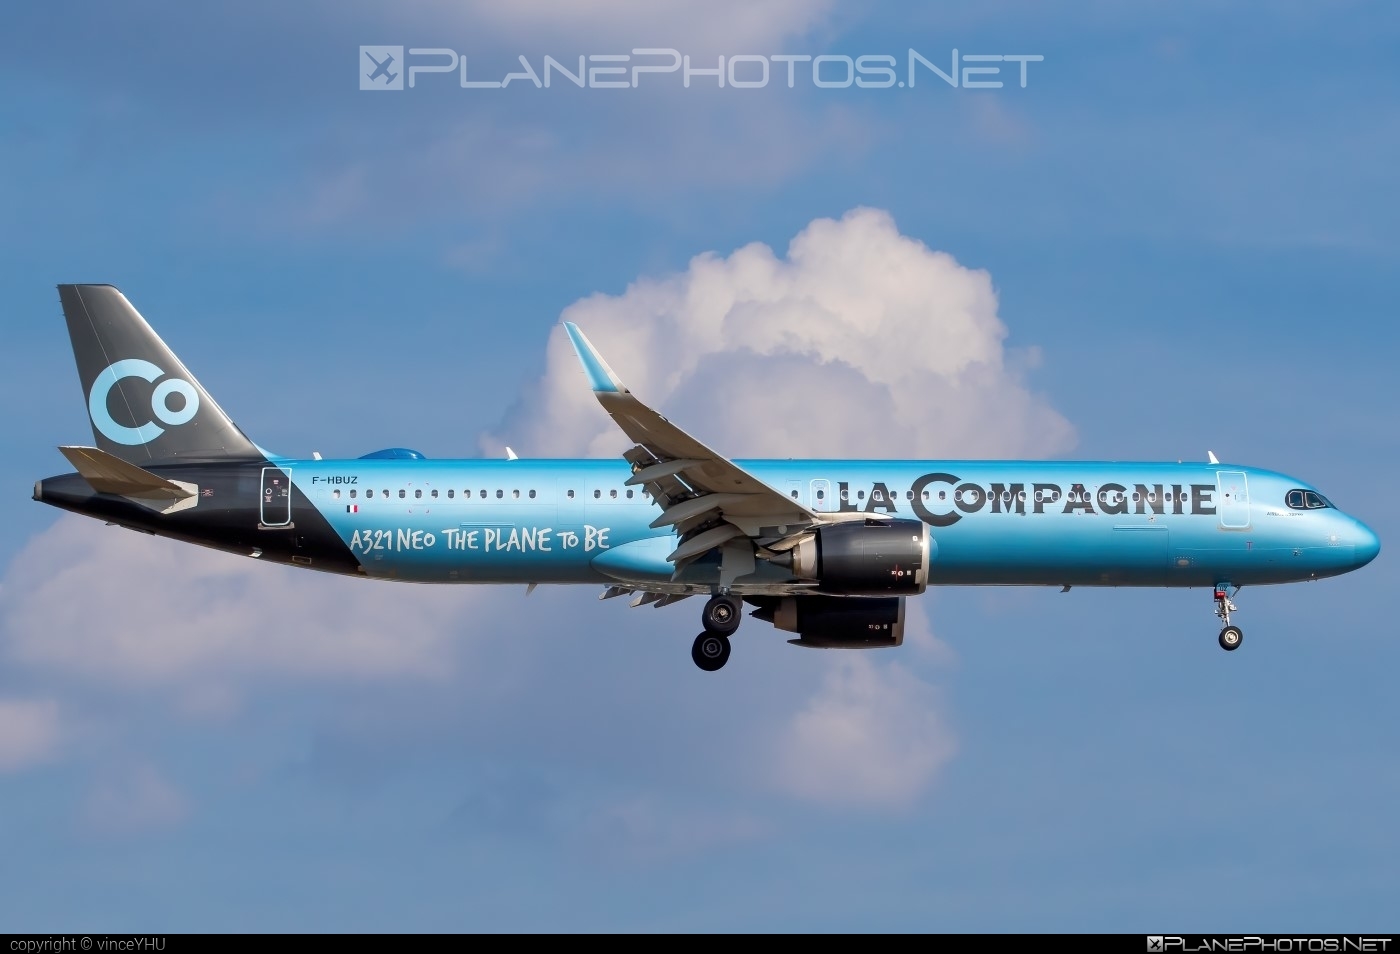 Airbus A321-251NX - F-HBUZ operated by La Compagnie #a320family #a321 #a321neo #airbus #airbus321 #airbus321lr #lacompagnie